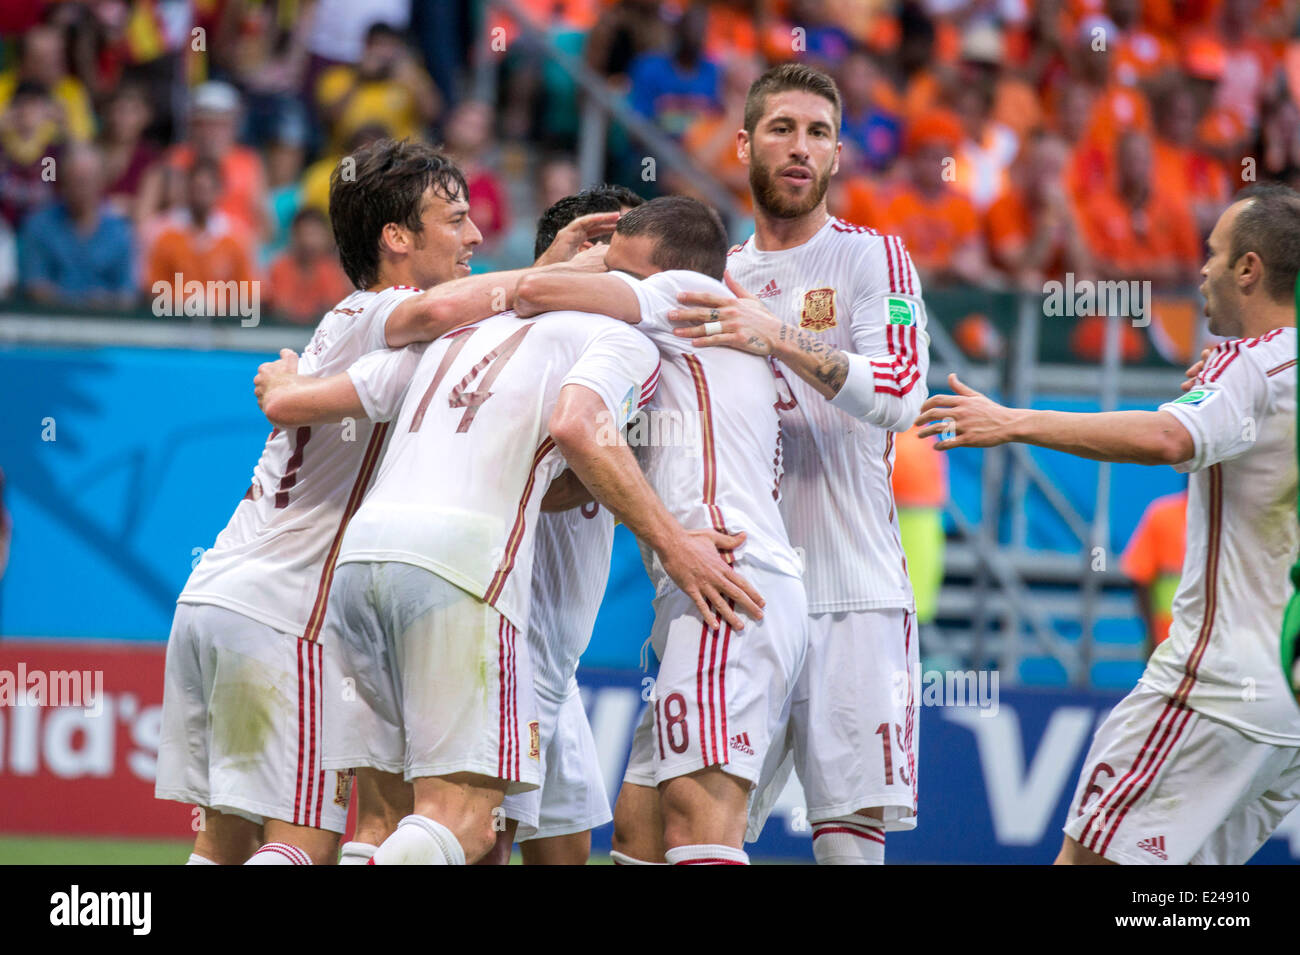 Spain team group (ESP), JUNE 13, 2014 - Football / Soccer : Xabi Alonso (14) of Spain celebrates scoring the opening goal from a penalty spot during the FIFA World Cup Brazil 2014 Group B match between Spain 1-5 Netherlands at Arena Fonte Nova in Salvador, Brazil. (Photo by Maurizio Borsari/AFLO) Stock Photo